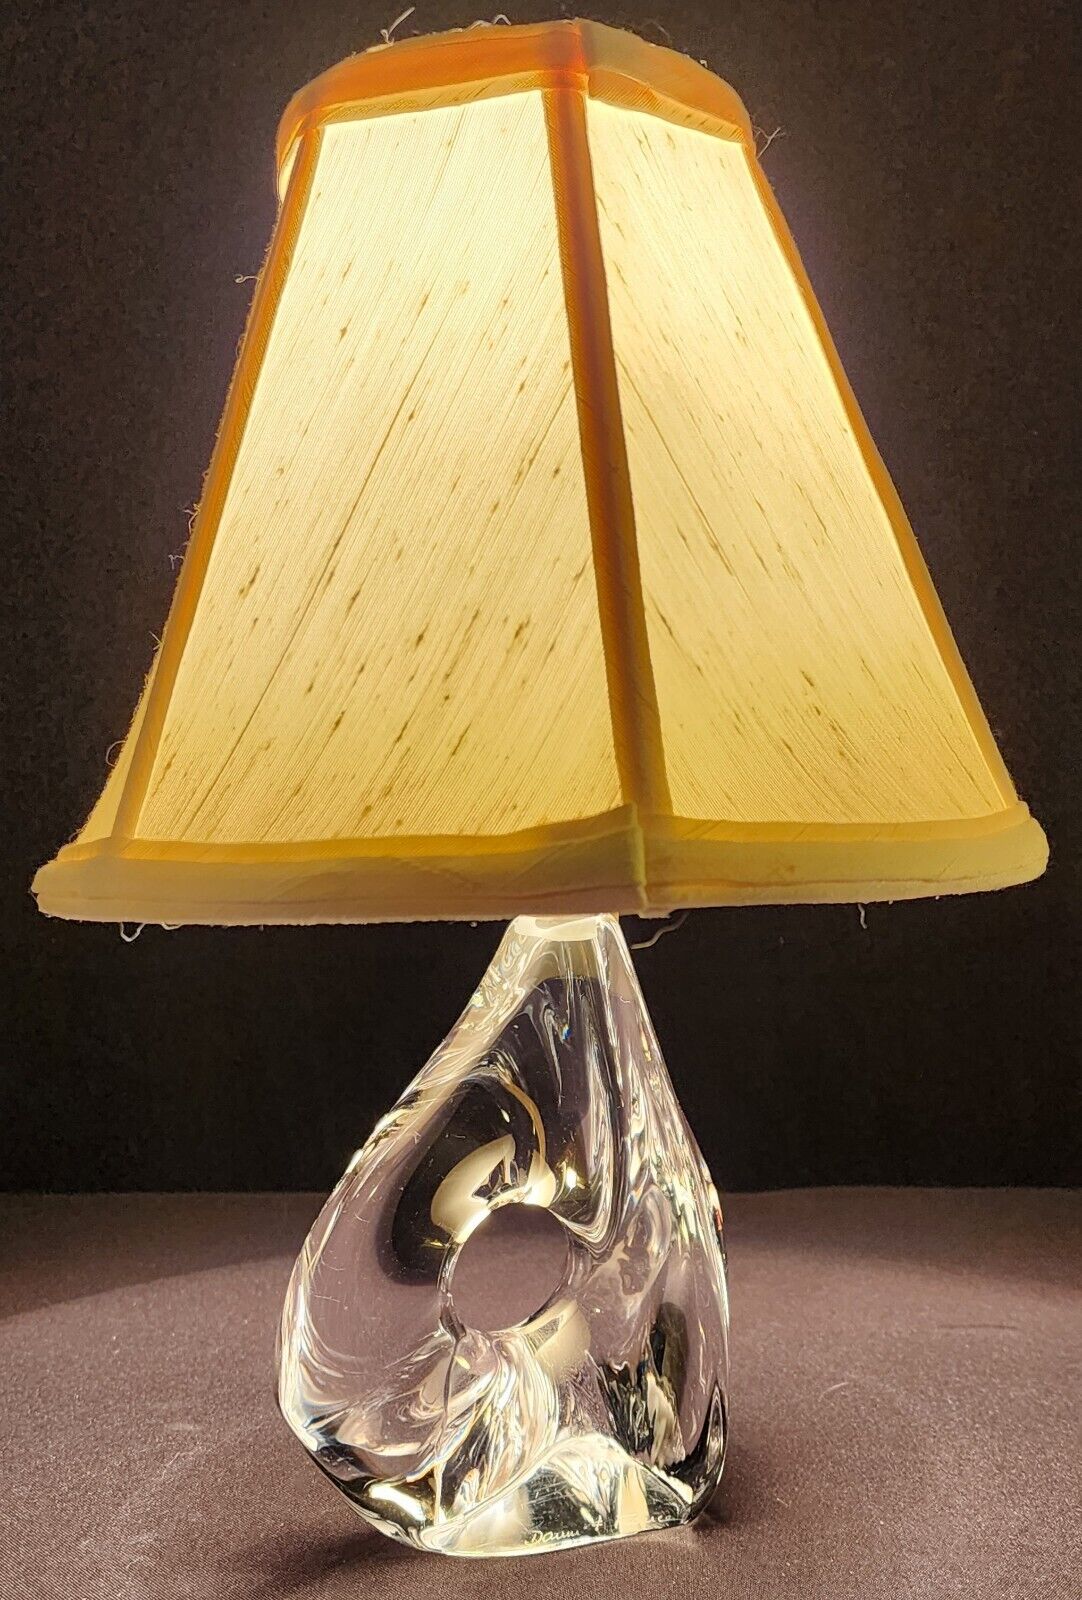 Daum French Crystal Lamp - 1950's Genuine Model 2 - Absolutely Mint Condition